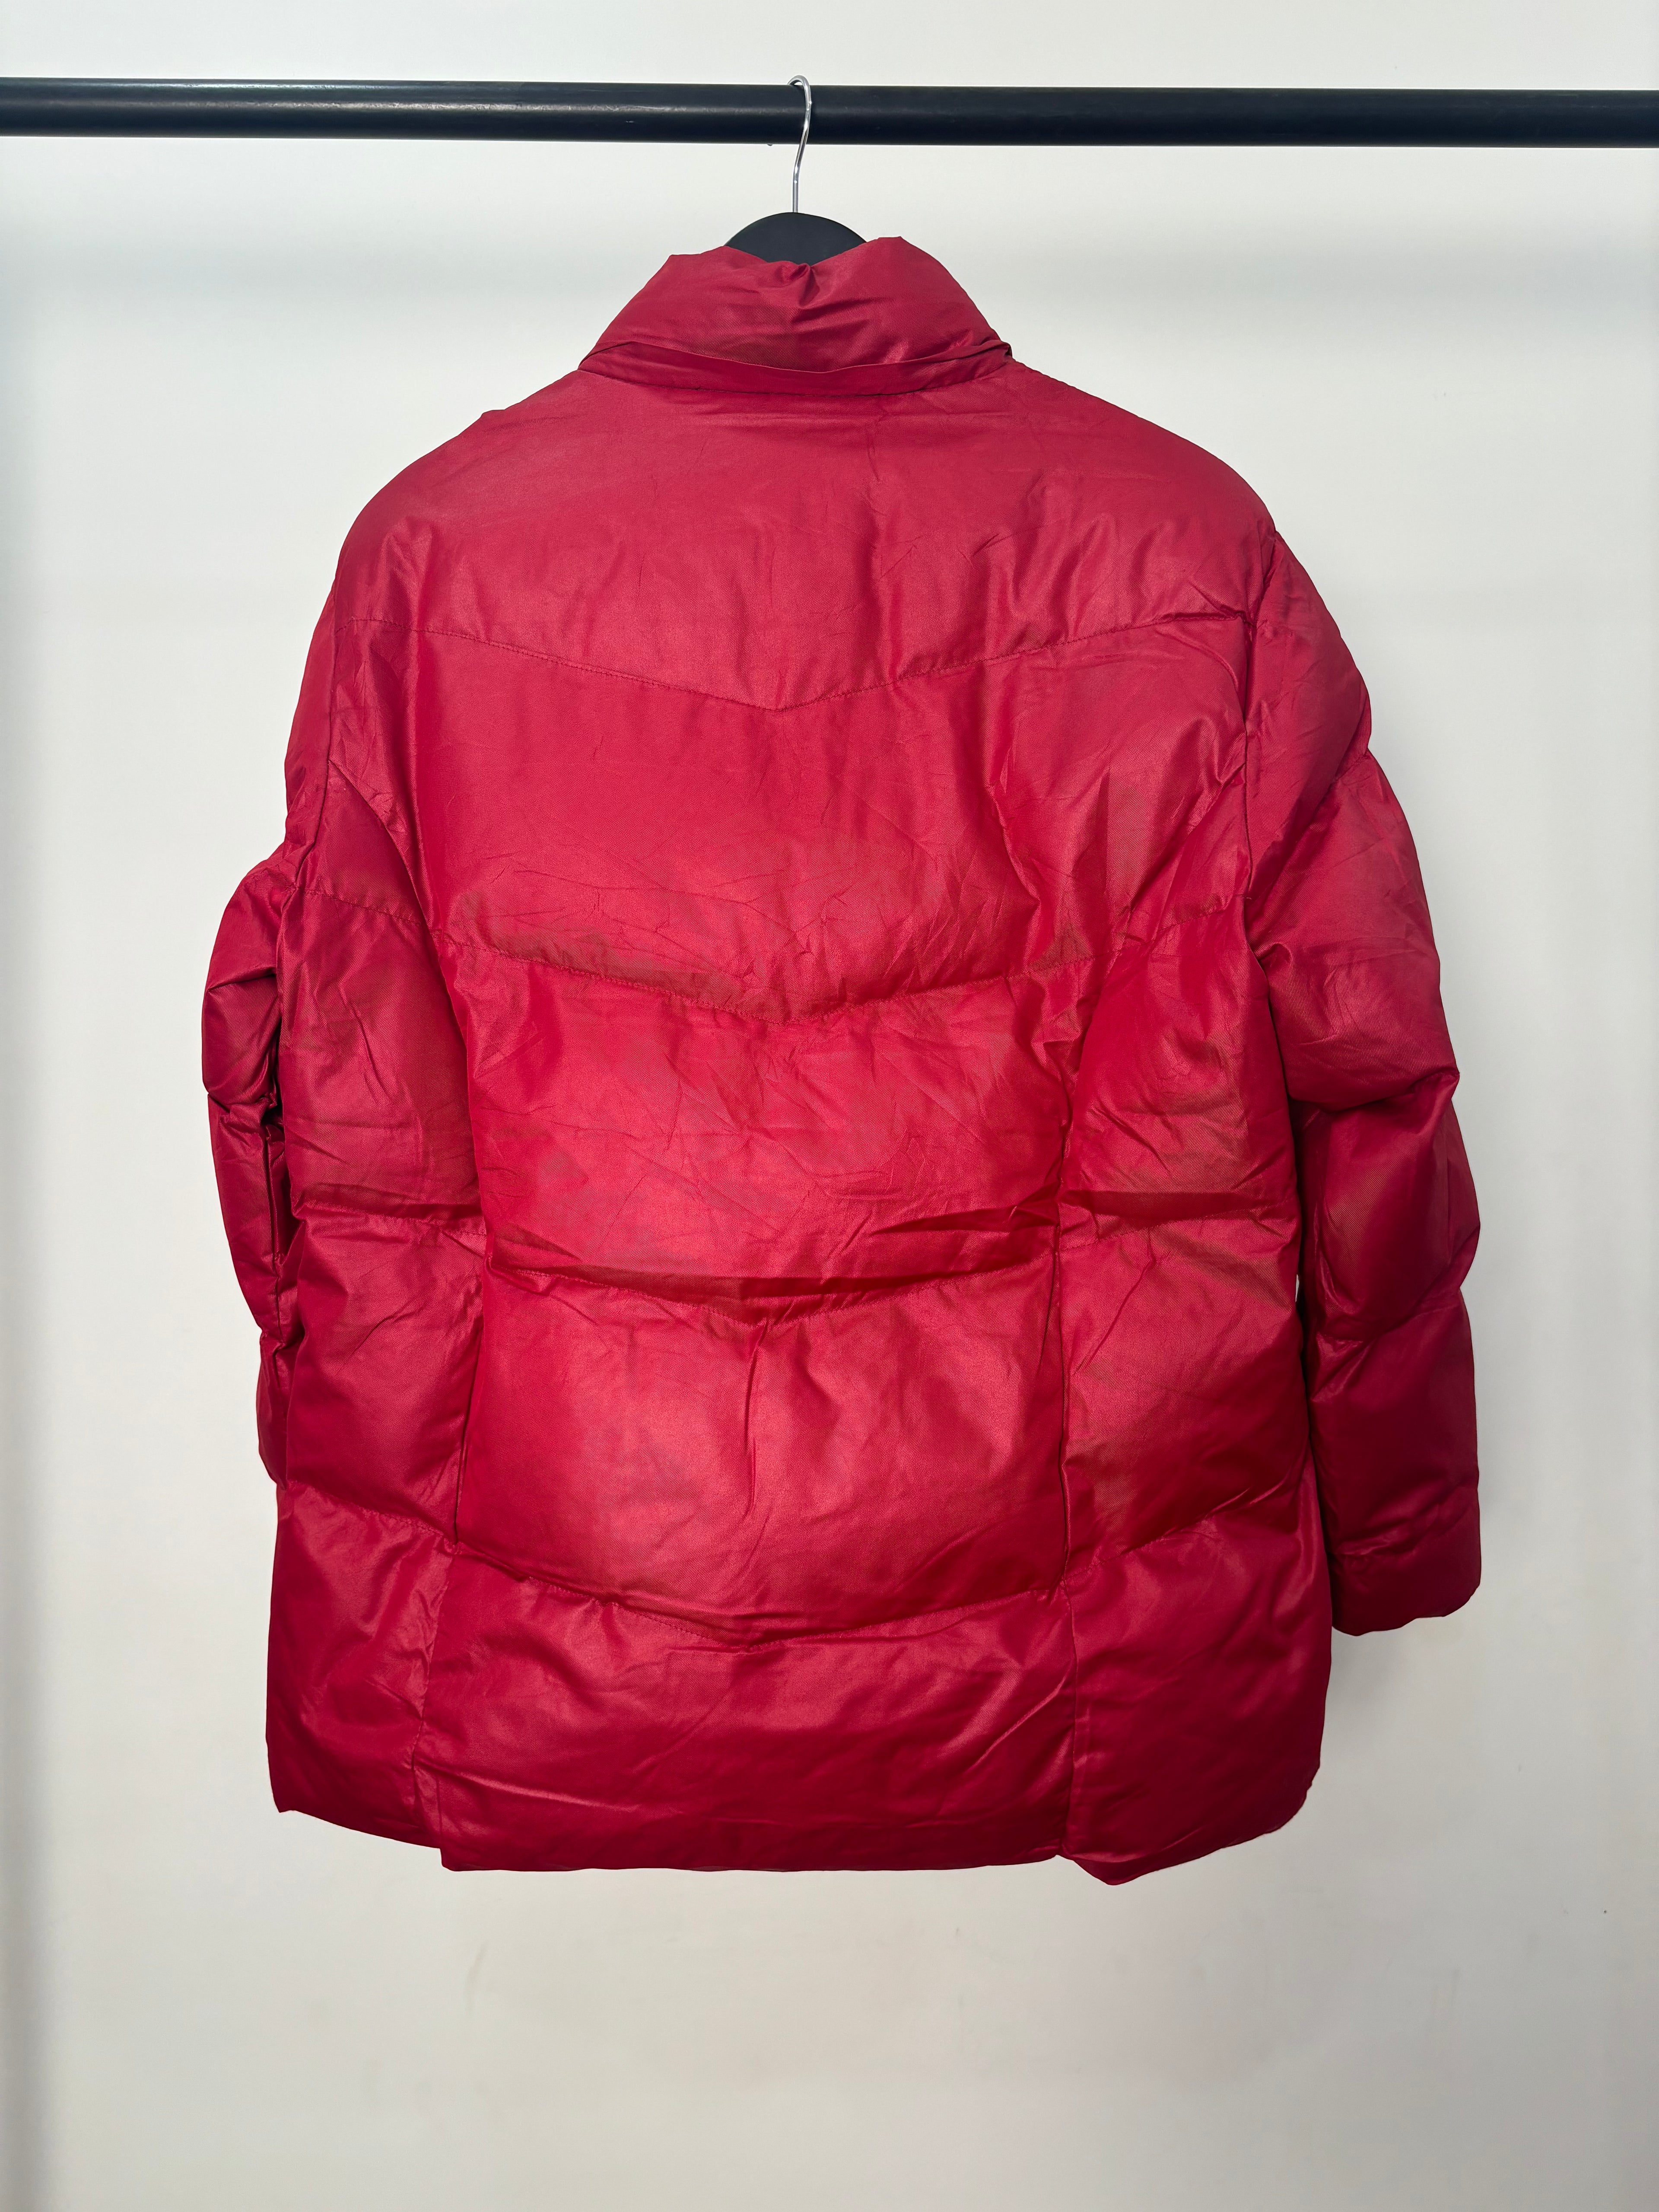 Maite Si Classic Red Puffer Jacket